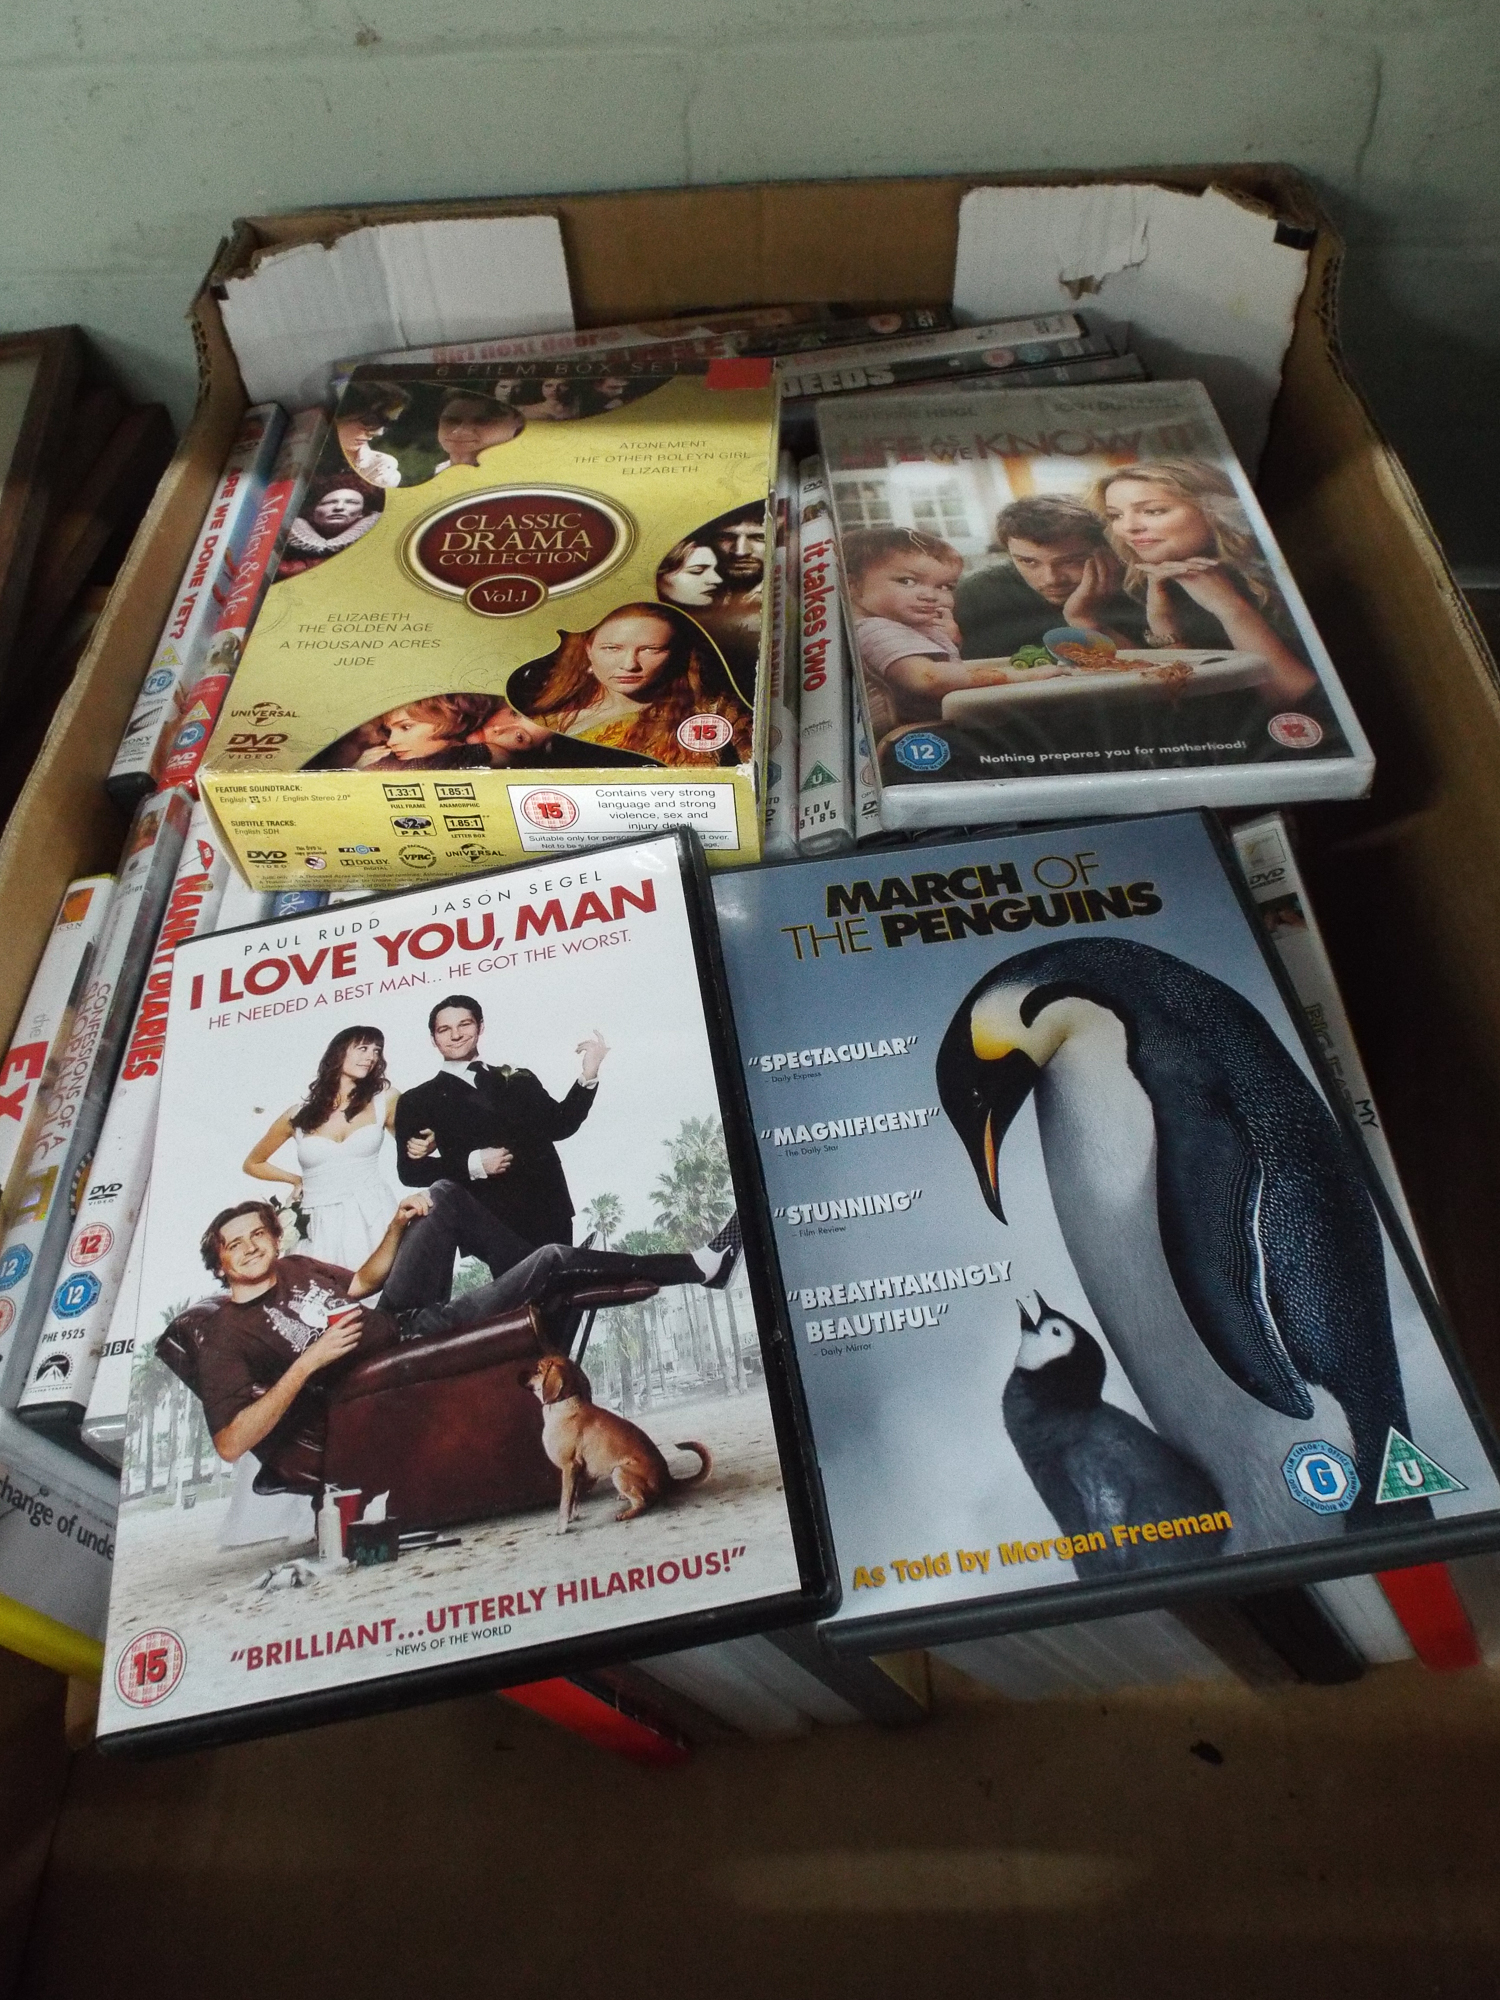 A large box of DVD's